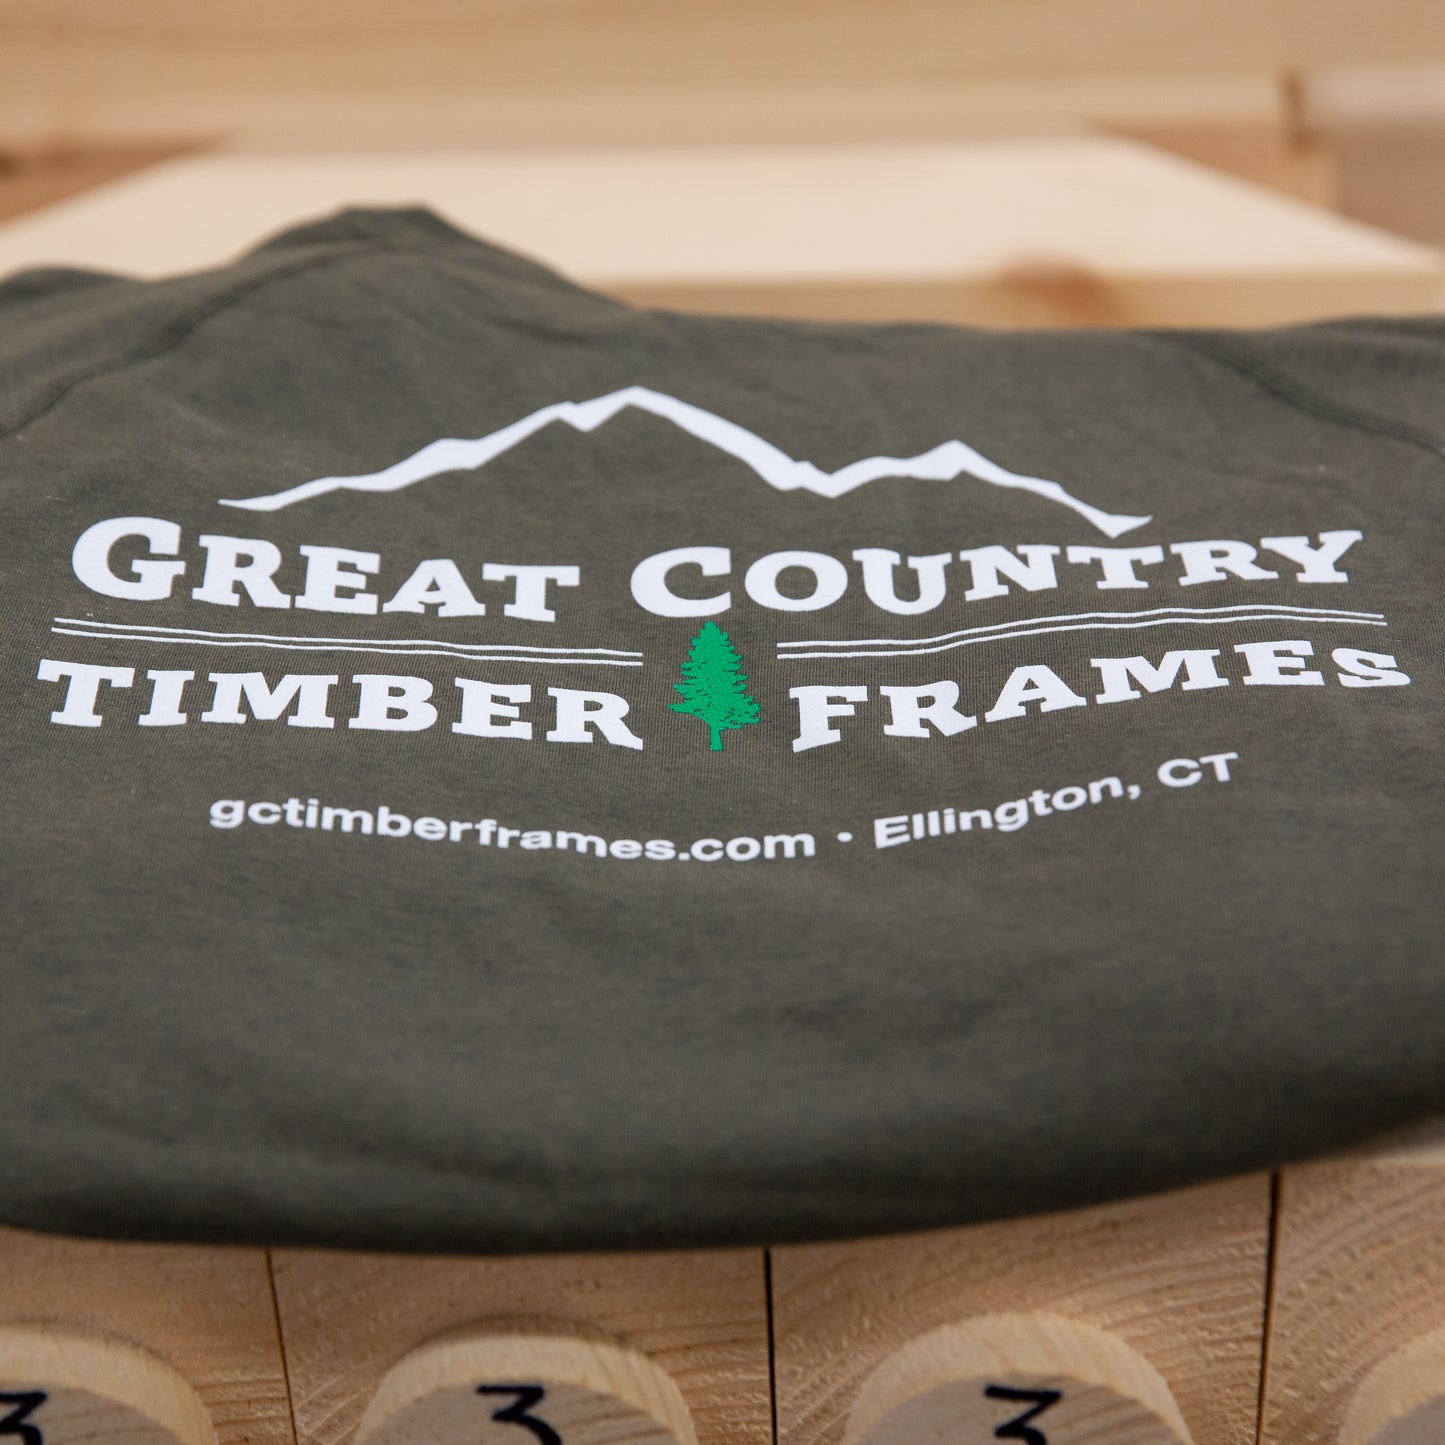 Great Country Timber Frames T-Shirt